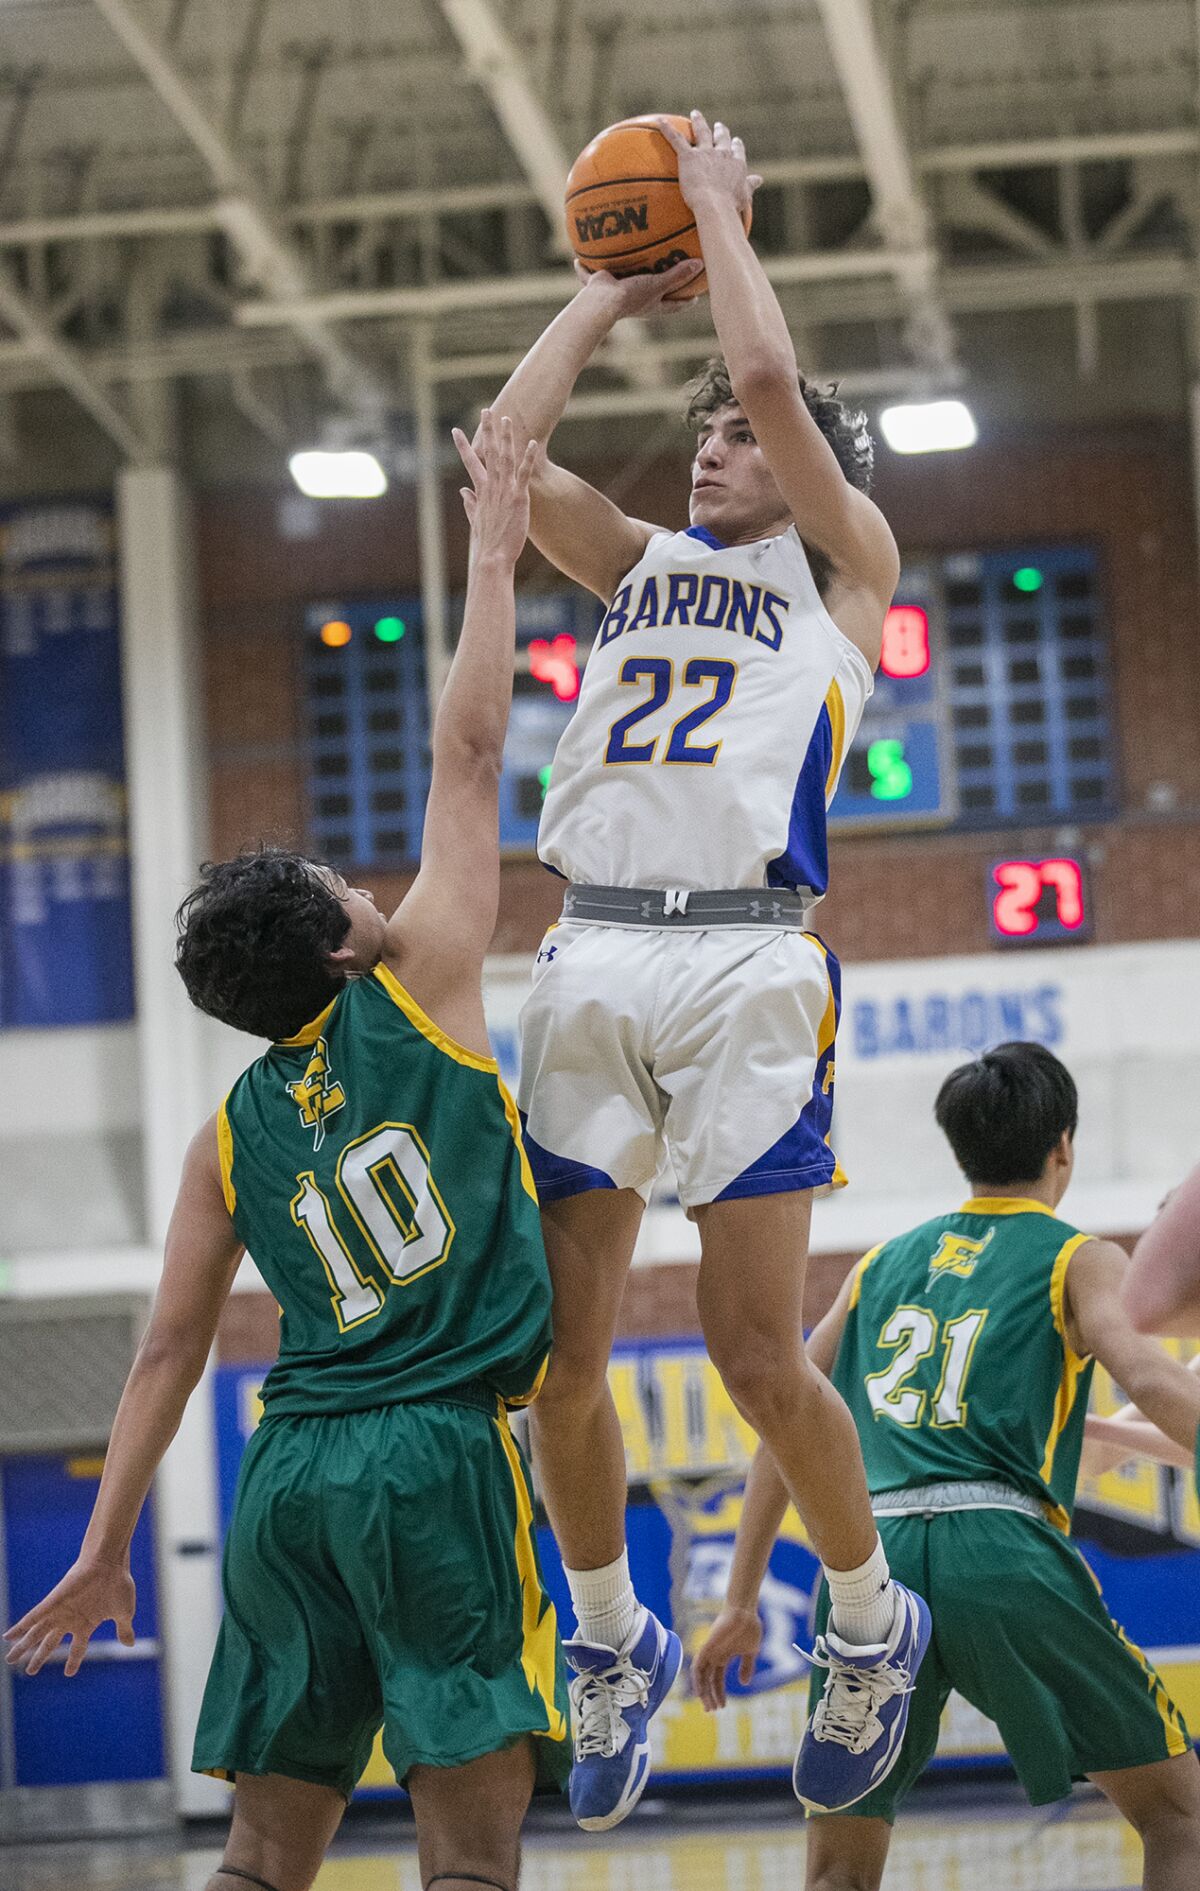 Fountain Valley's Devin Payne goes up for a shot over Edison's Garin Takushi at Fountain Valley High on Thursday.